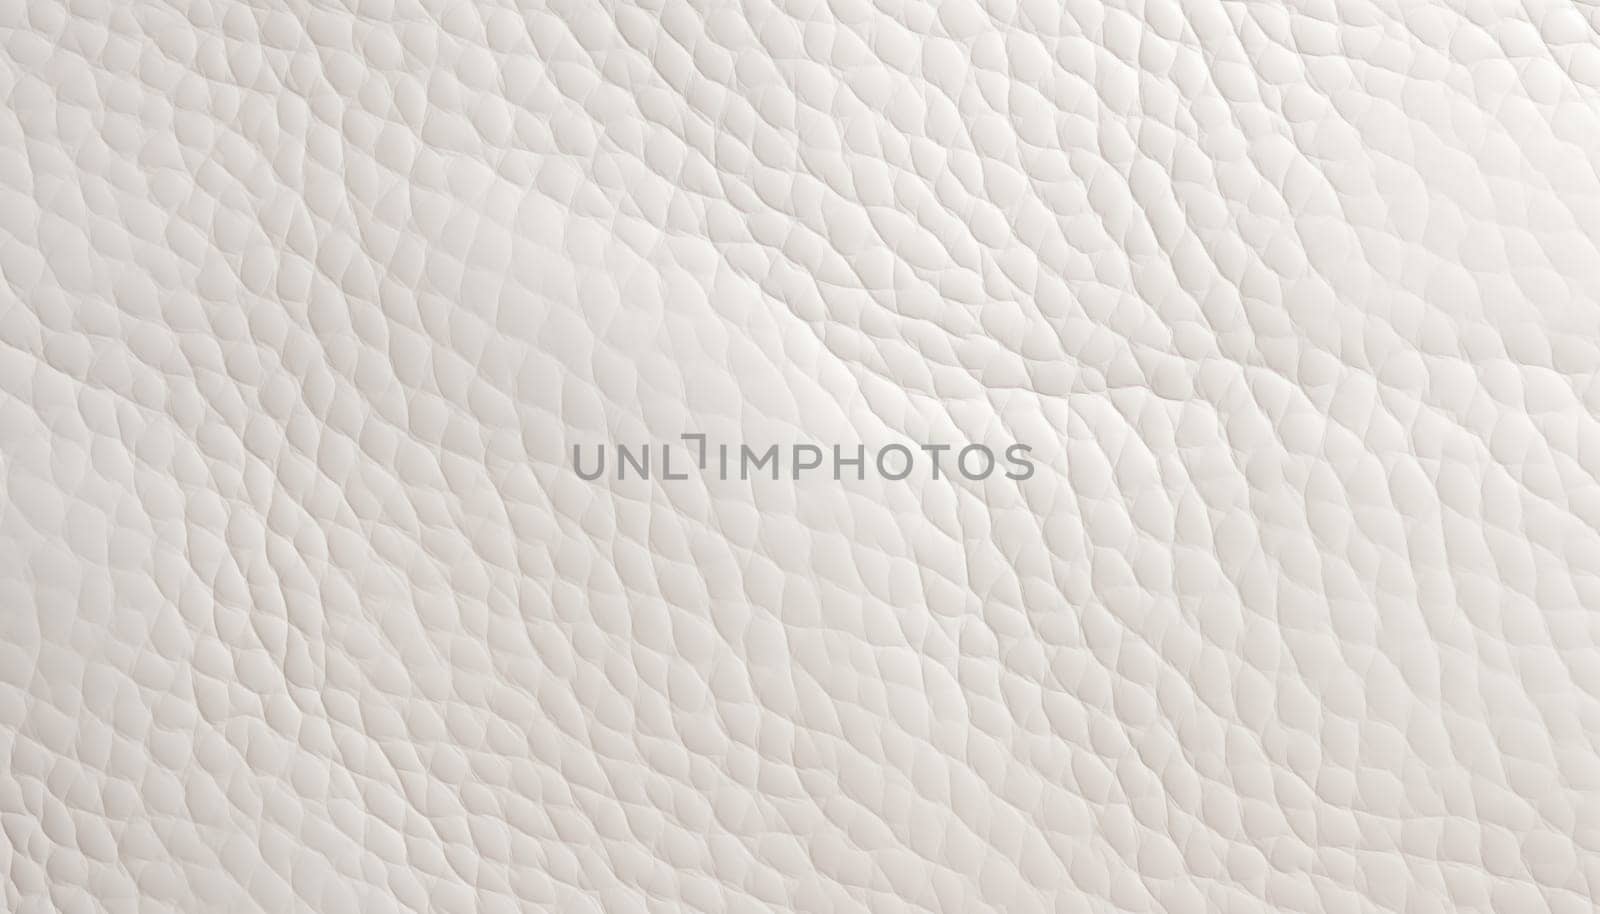 White leather background. High quality photo